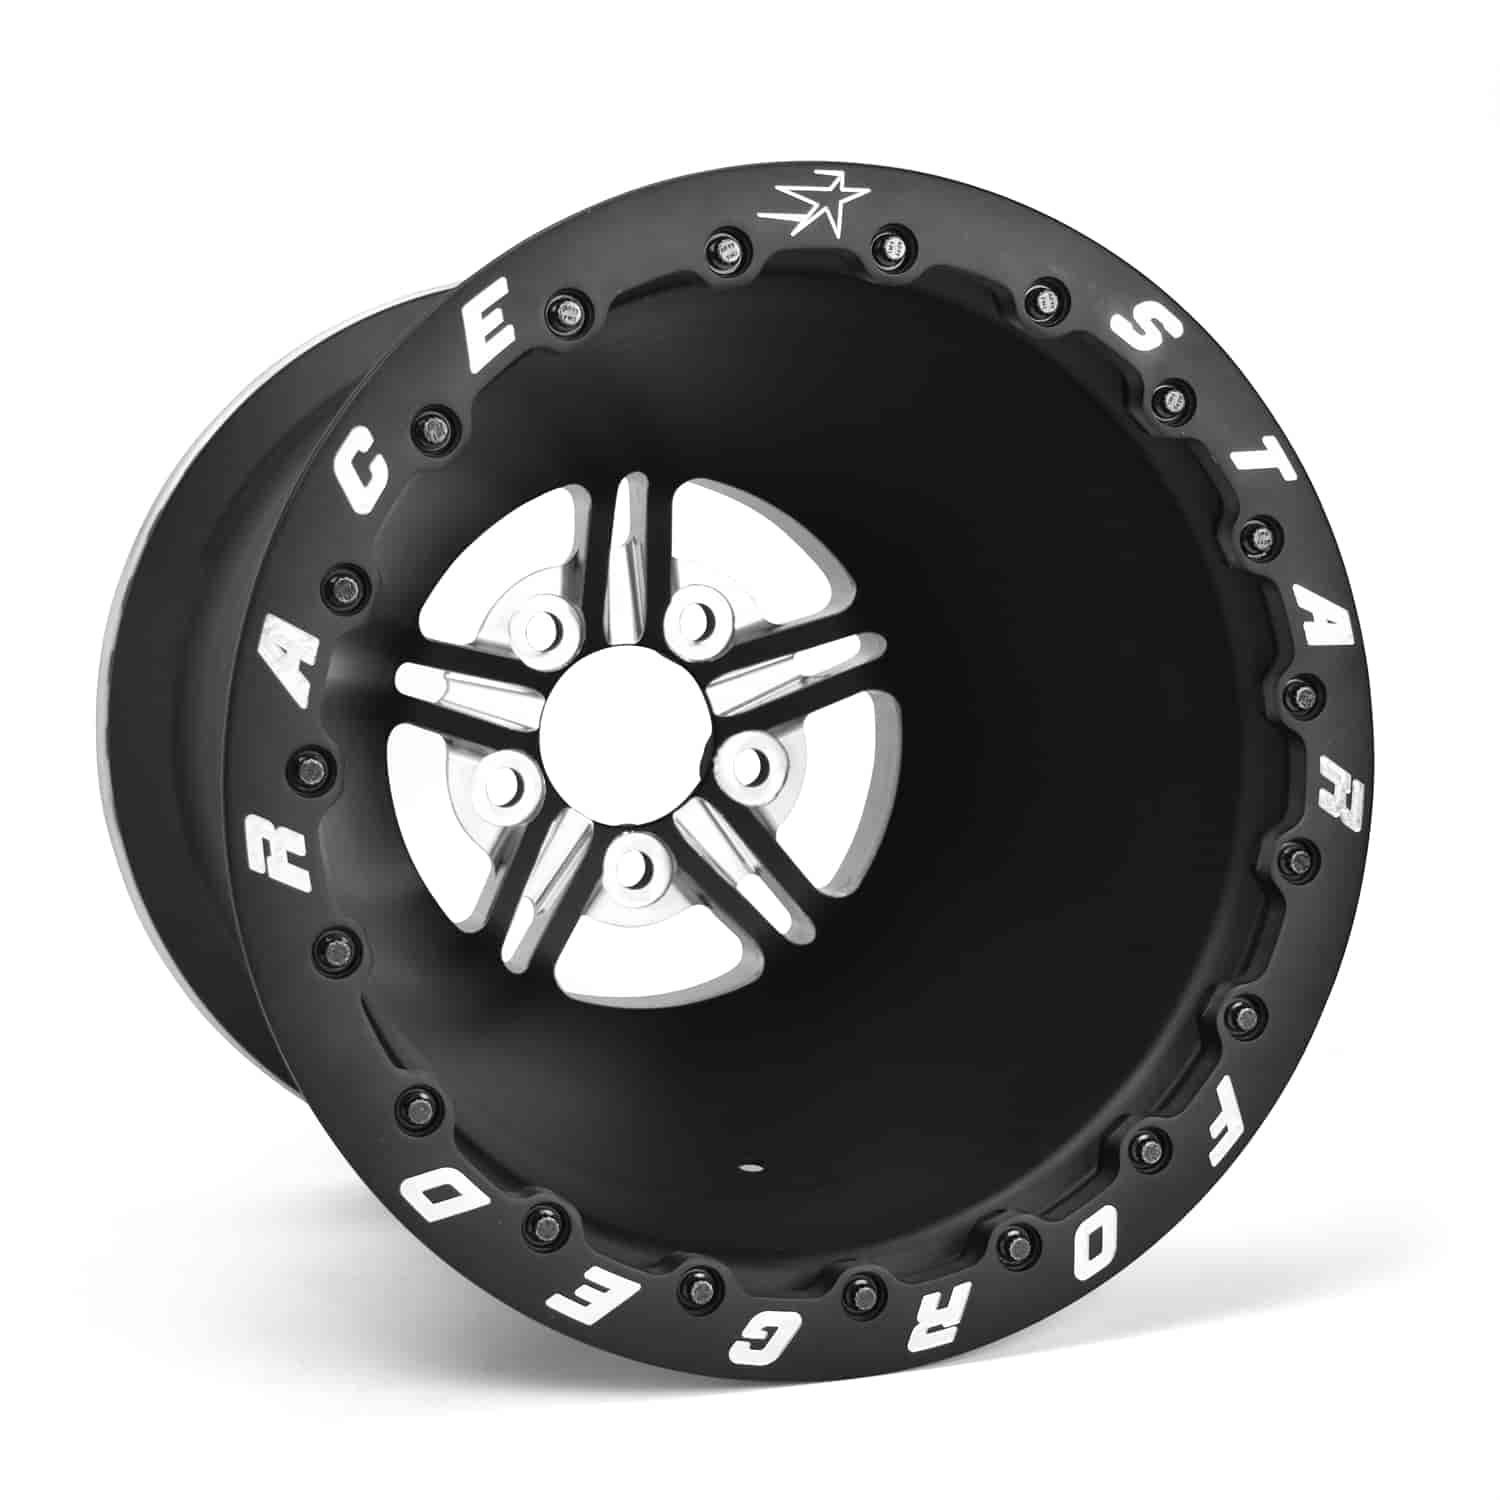 63-Series Pro Forged Double Bead-Lock Wheel Size: 15" x 15"